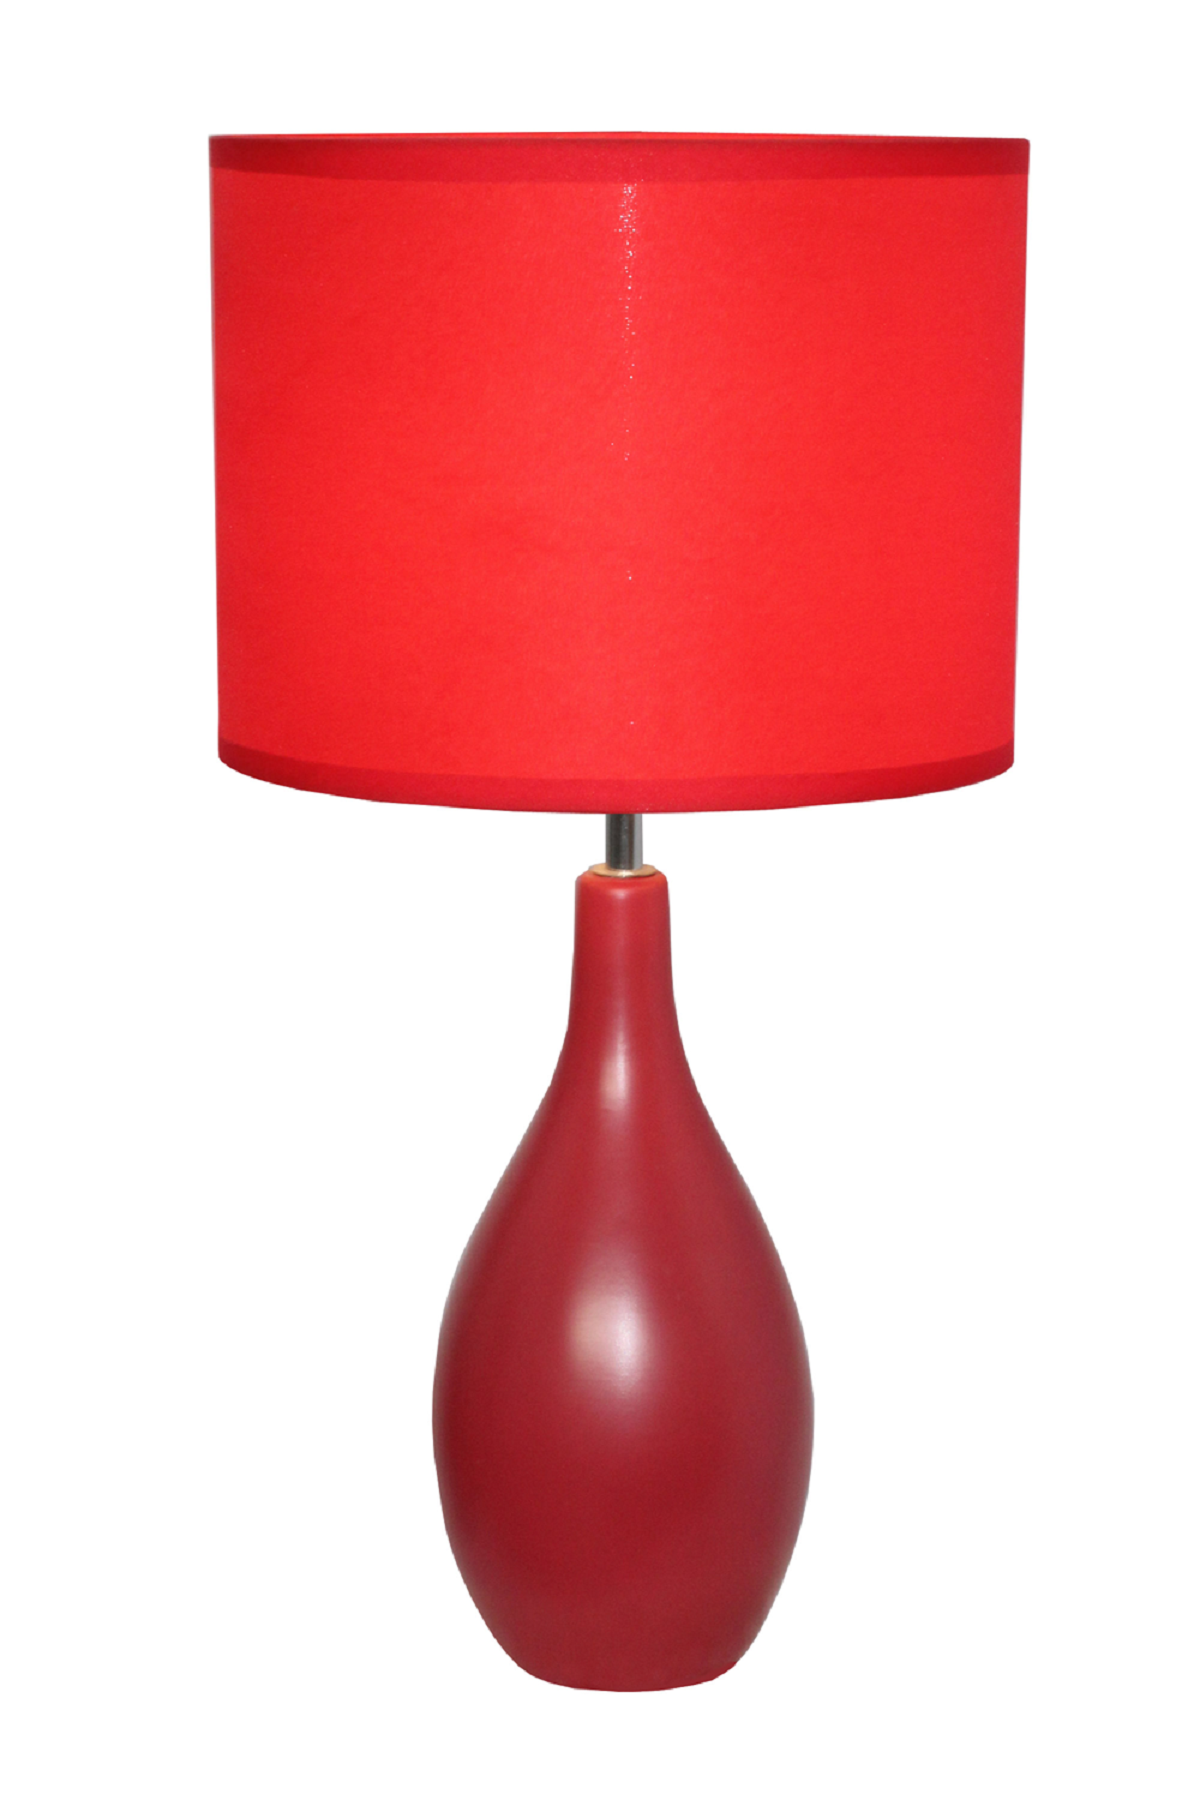 Simple Designs Red Oval Base Ceramic Table Lamp